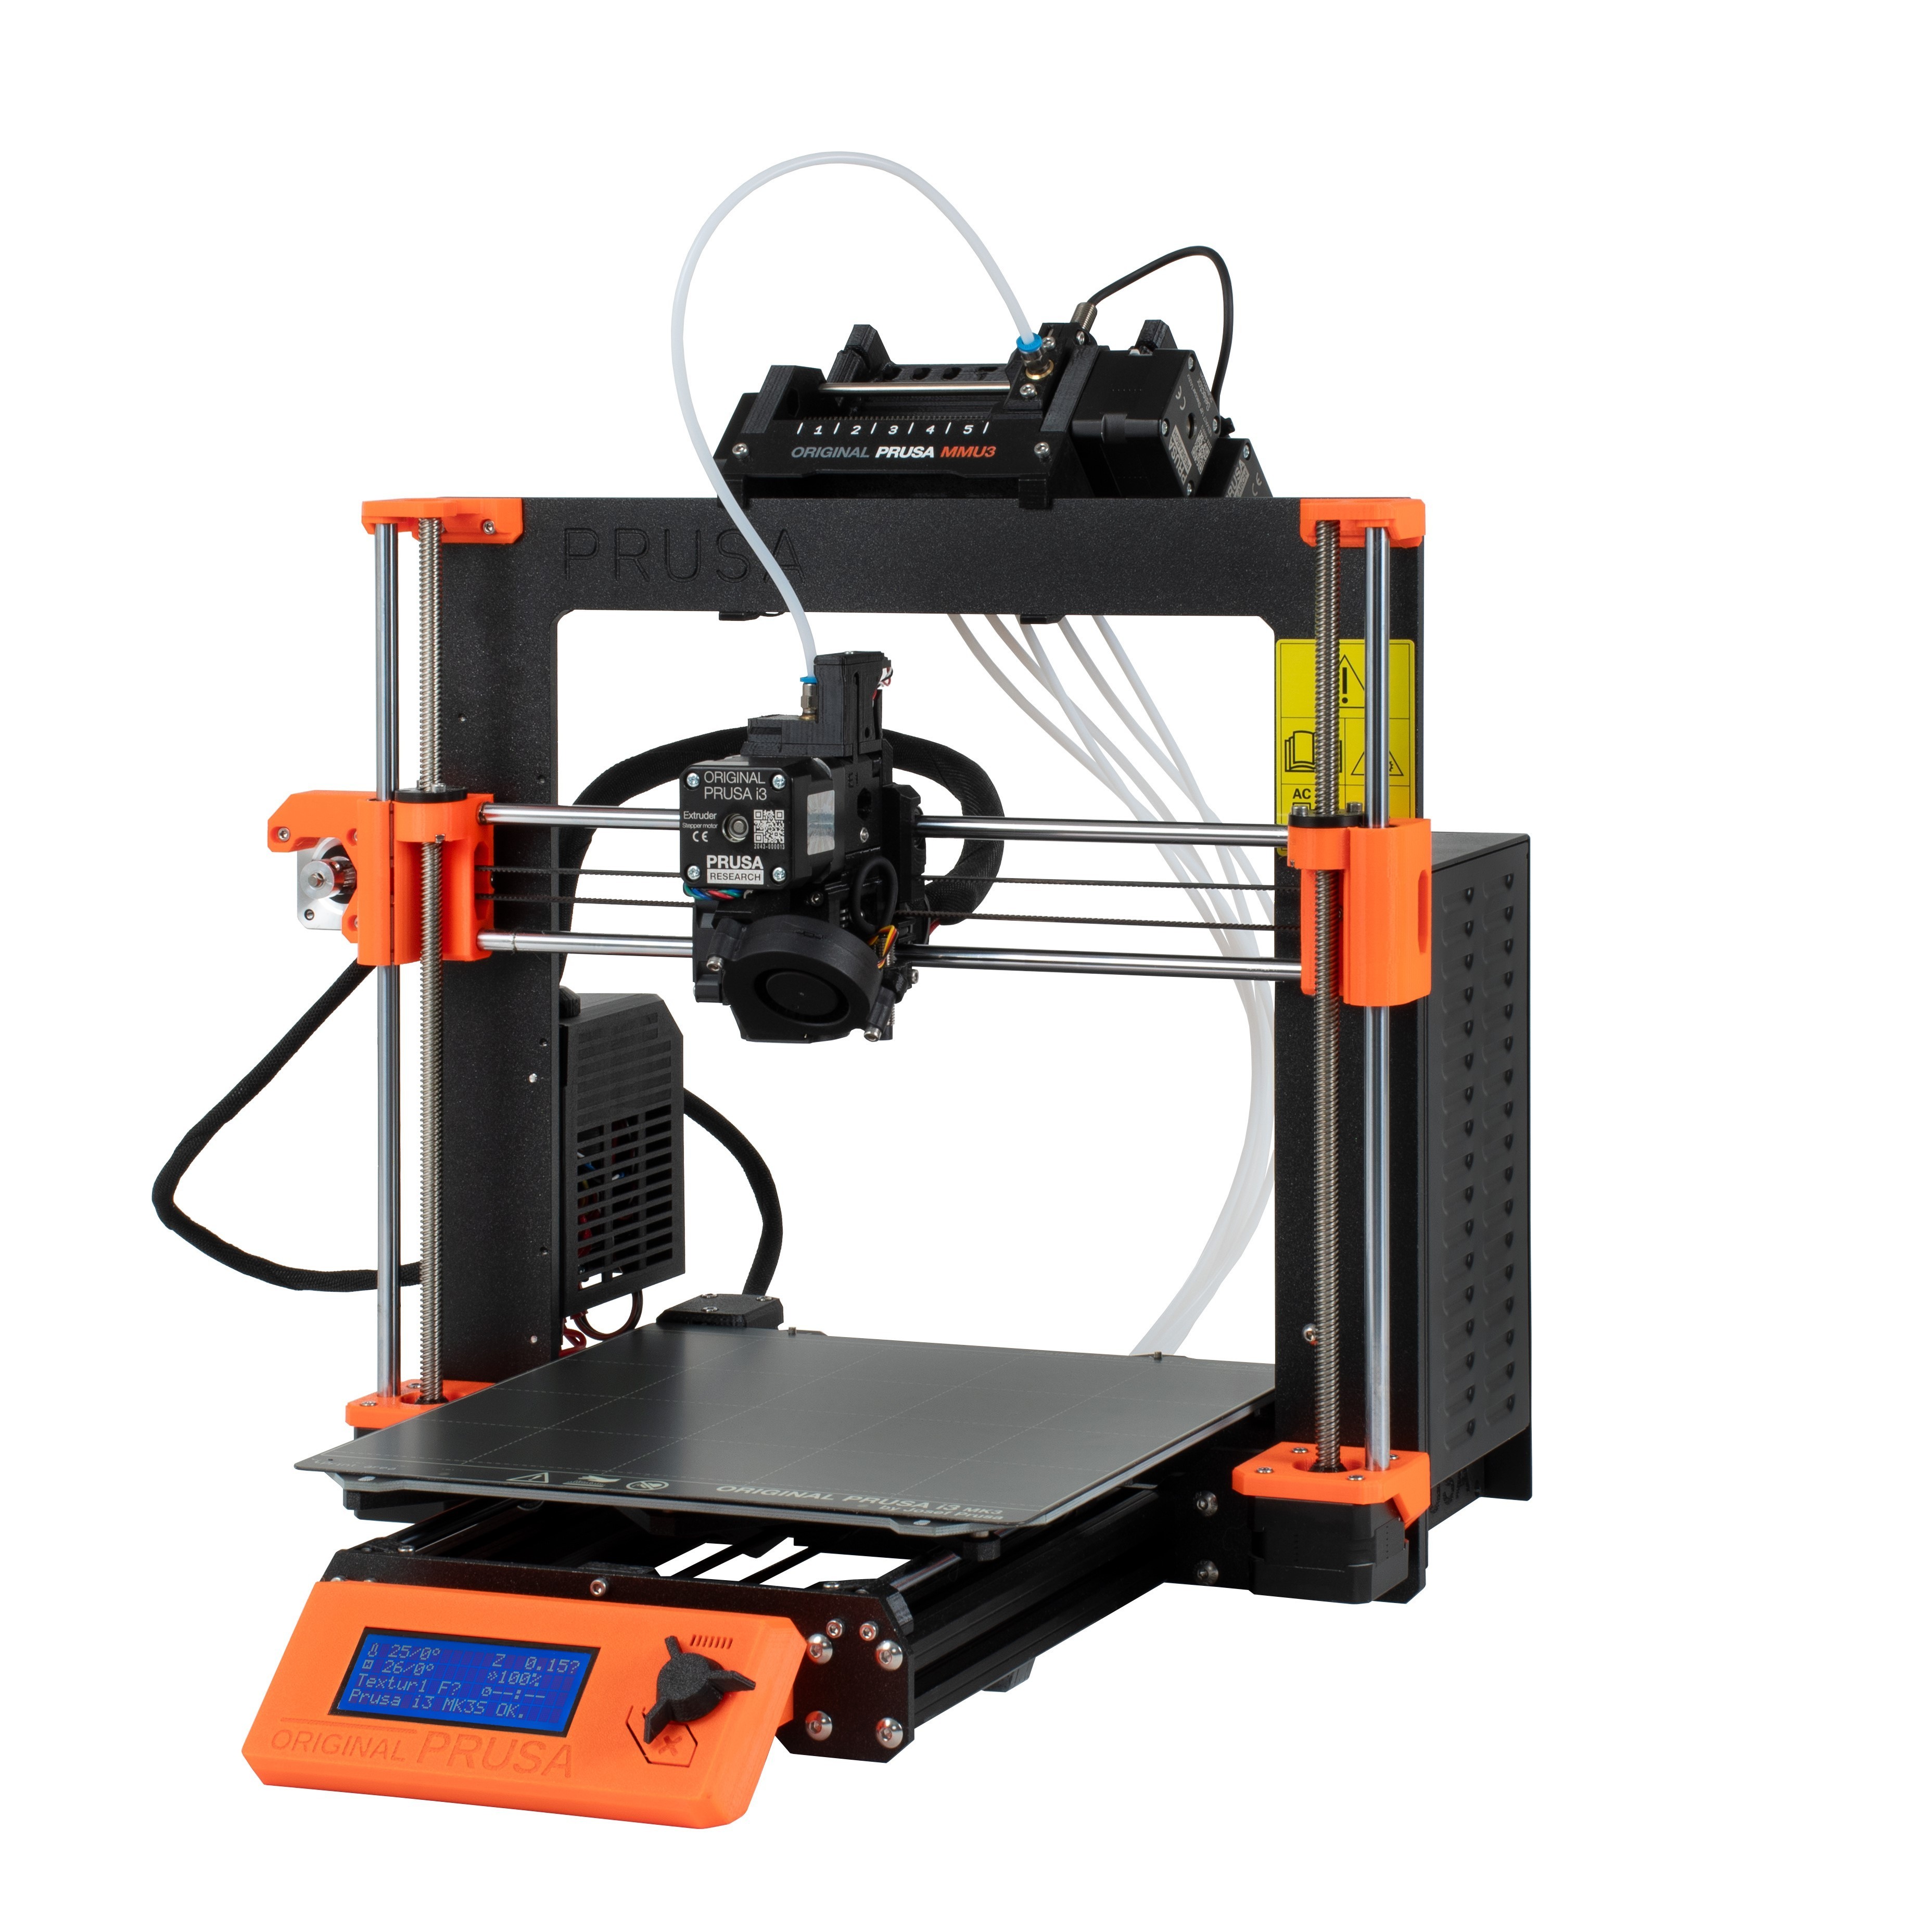 Original Prusa MMU3 now shipping: multi-material printing with